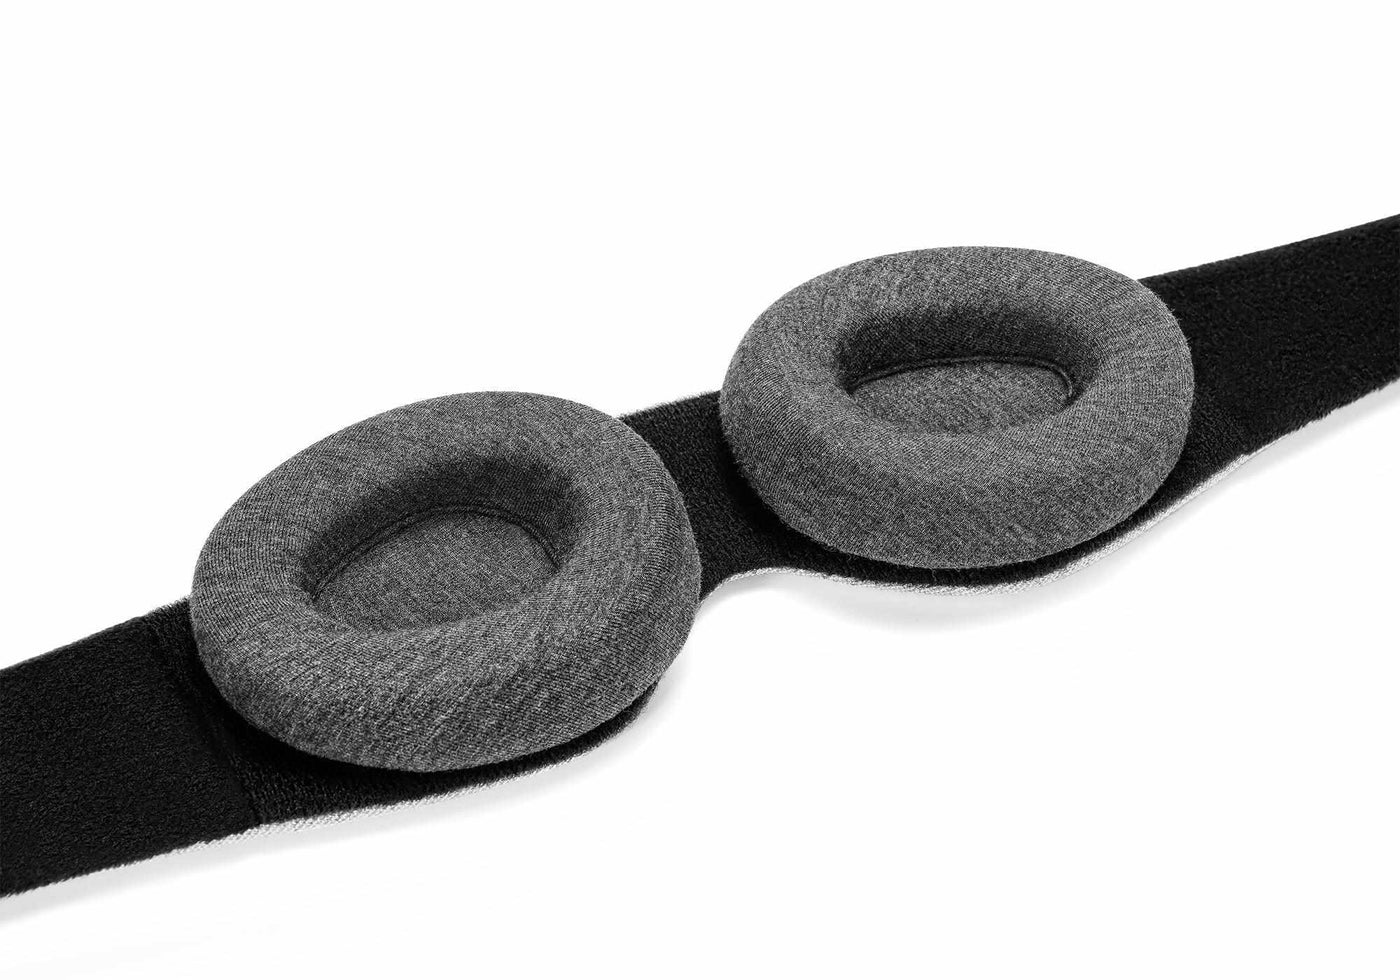 The black interior of a sleep mask’s head strap with 2 convex eye cups attached.